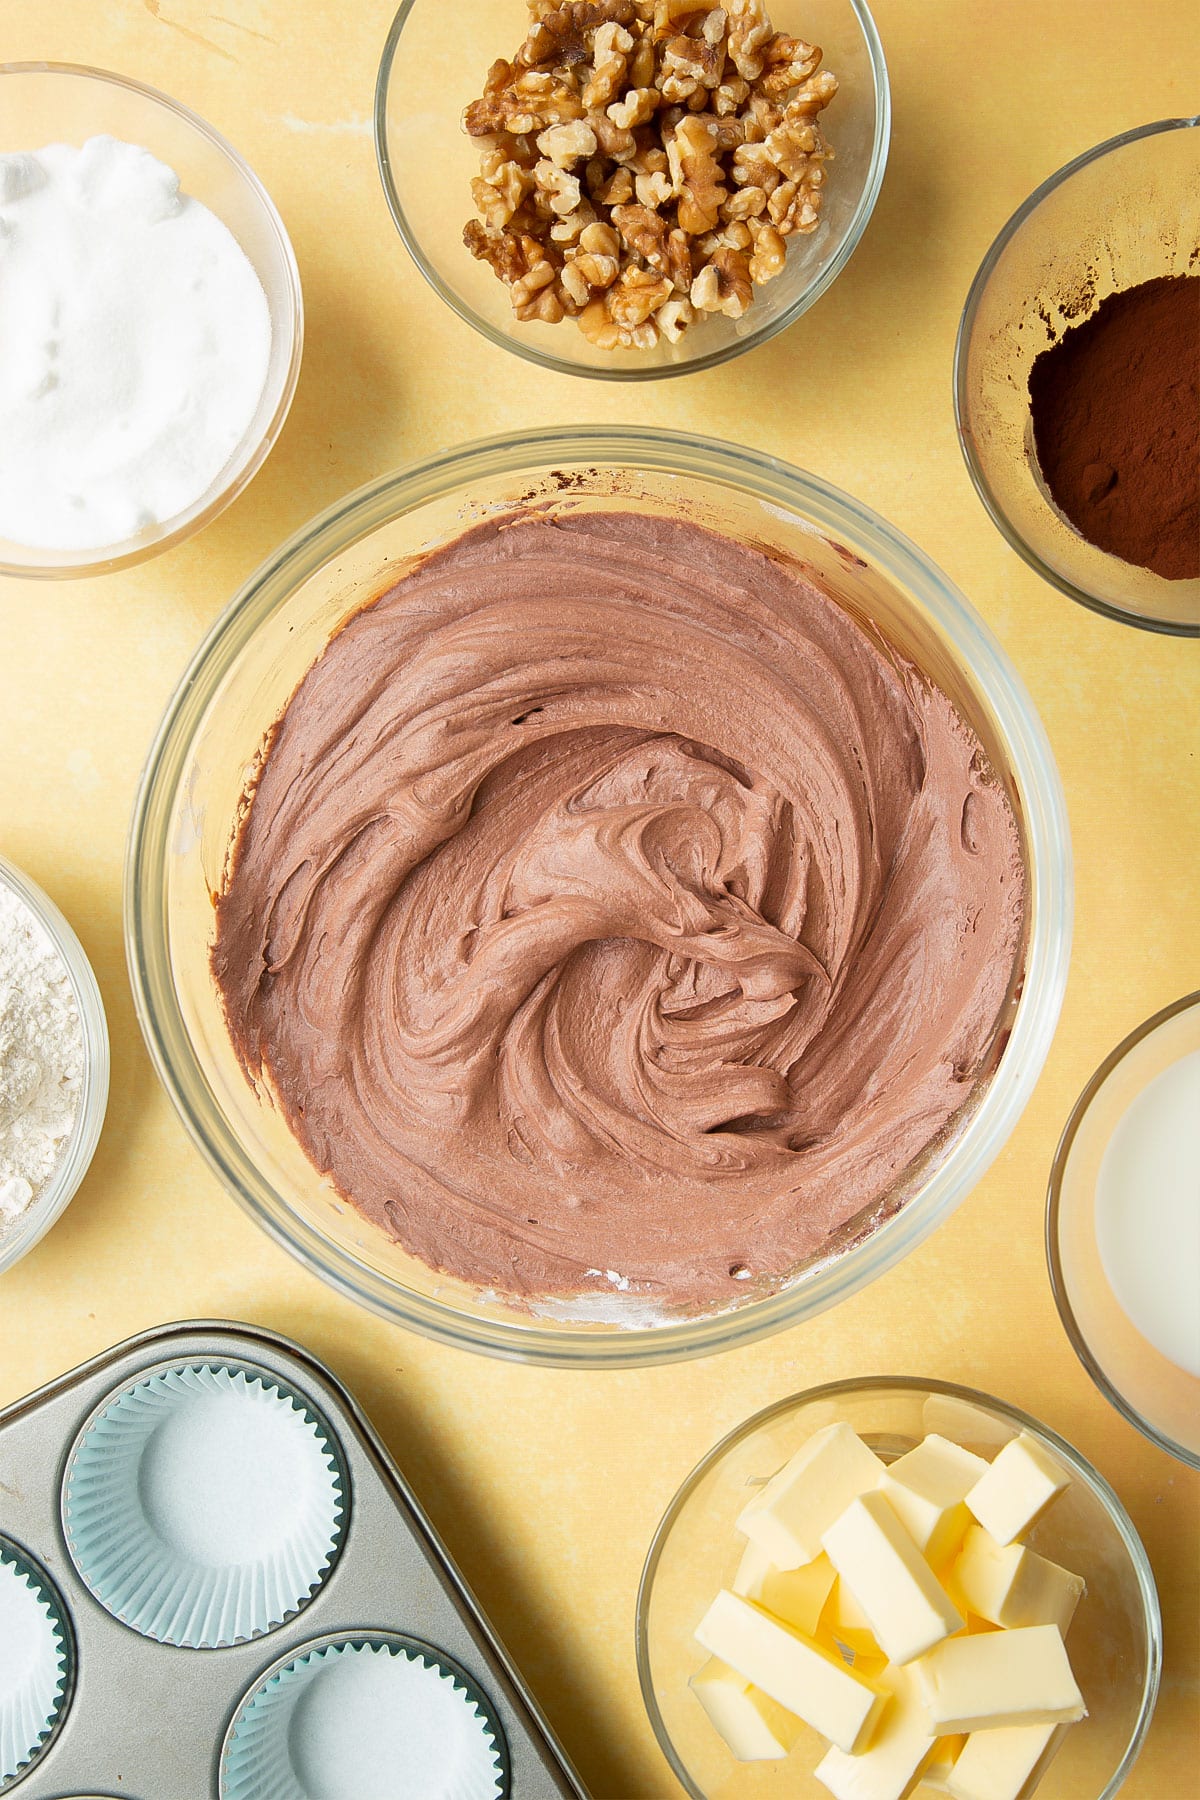 Whipped chocolate frosting in a glass mixing bowl. Ingredients for chocolate walnut cupcakes surround the bowl.